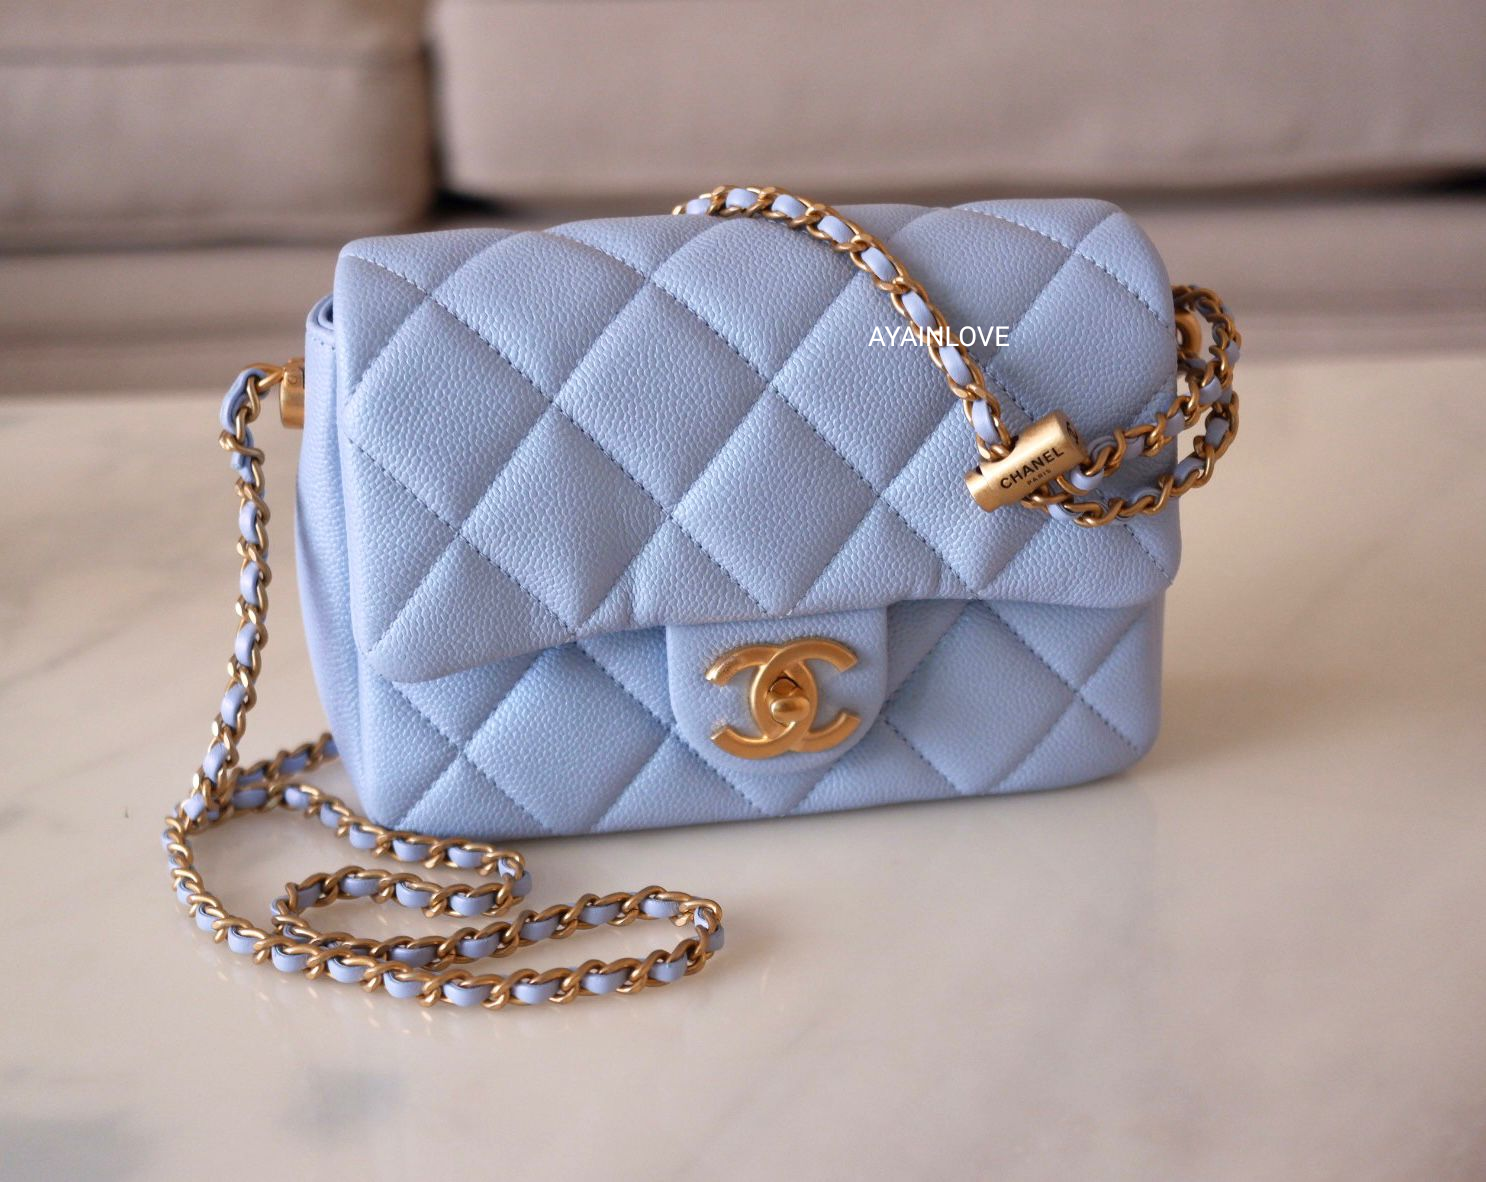 chanel shopping bag leather small